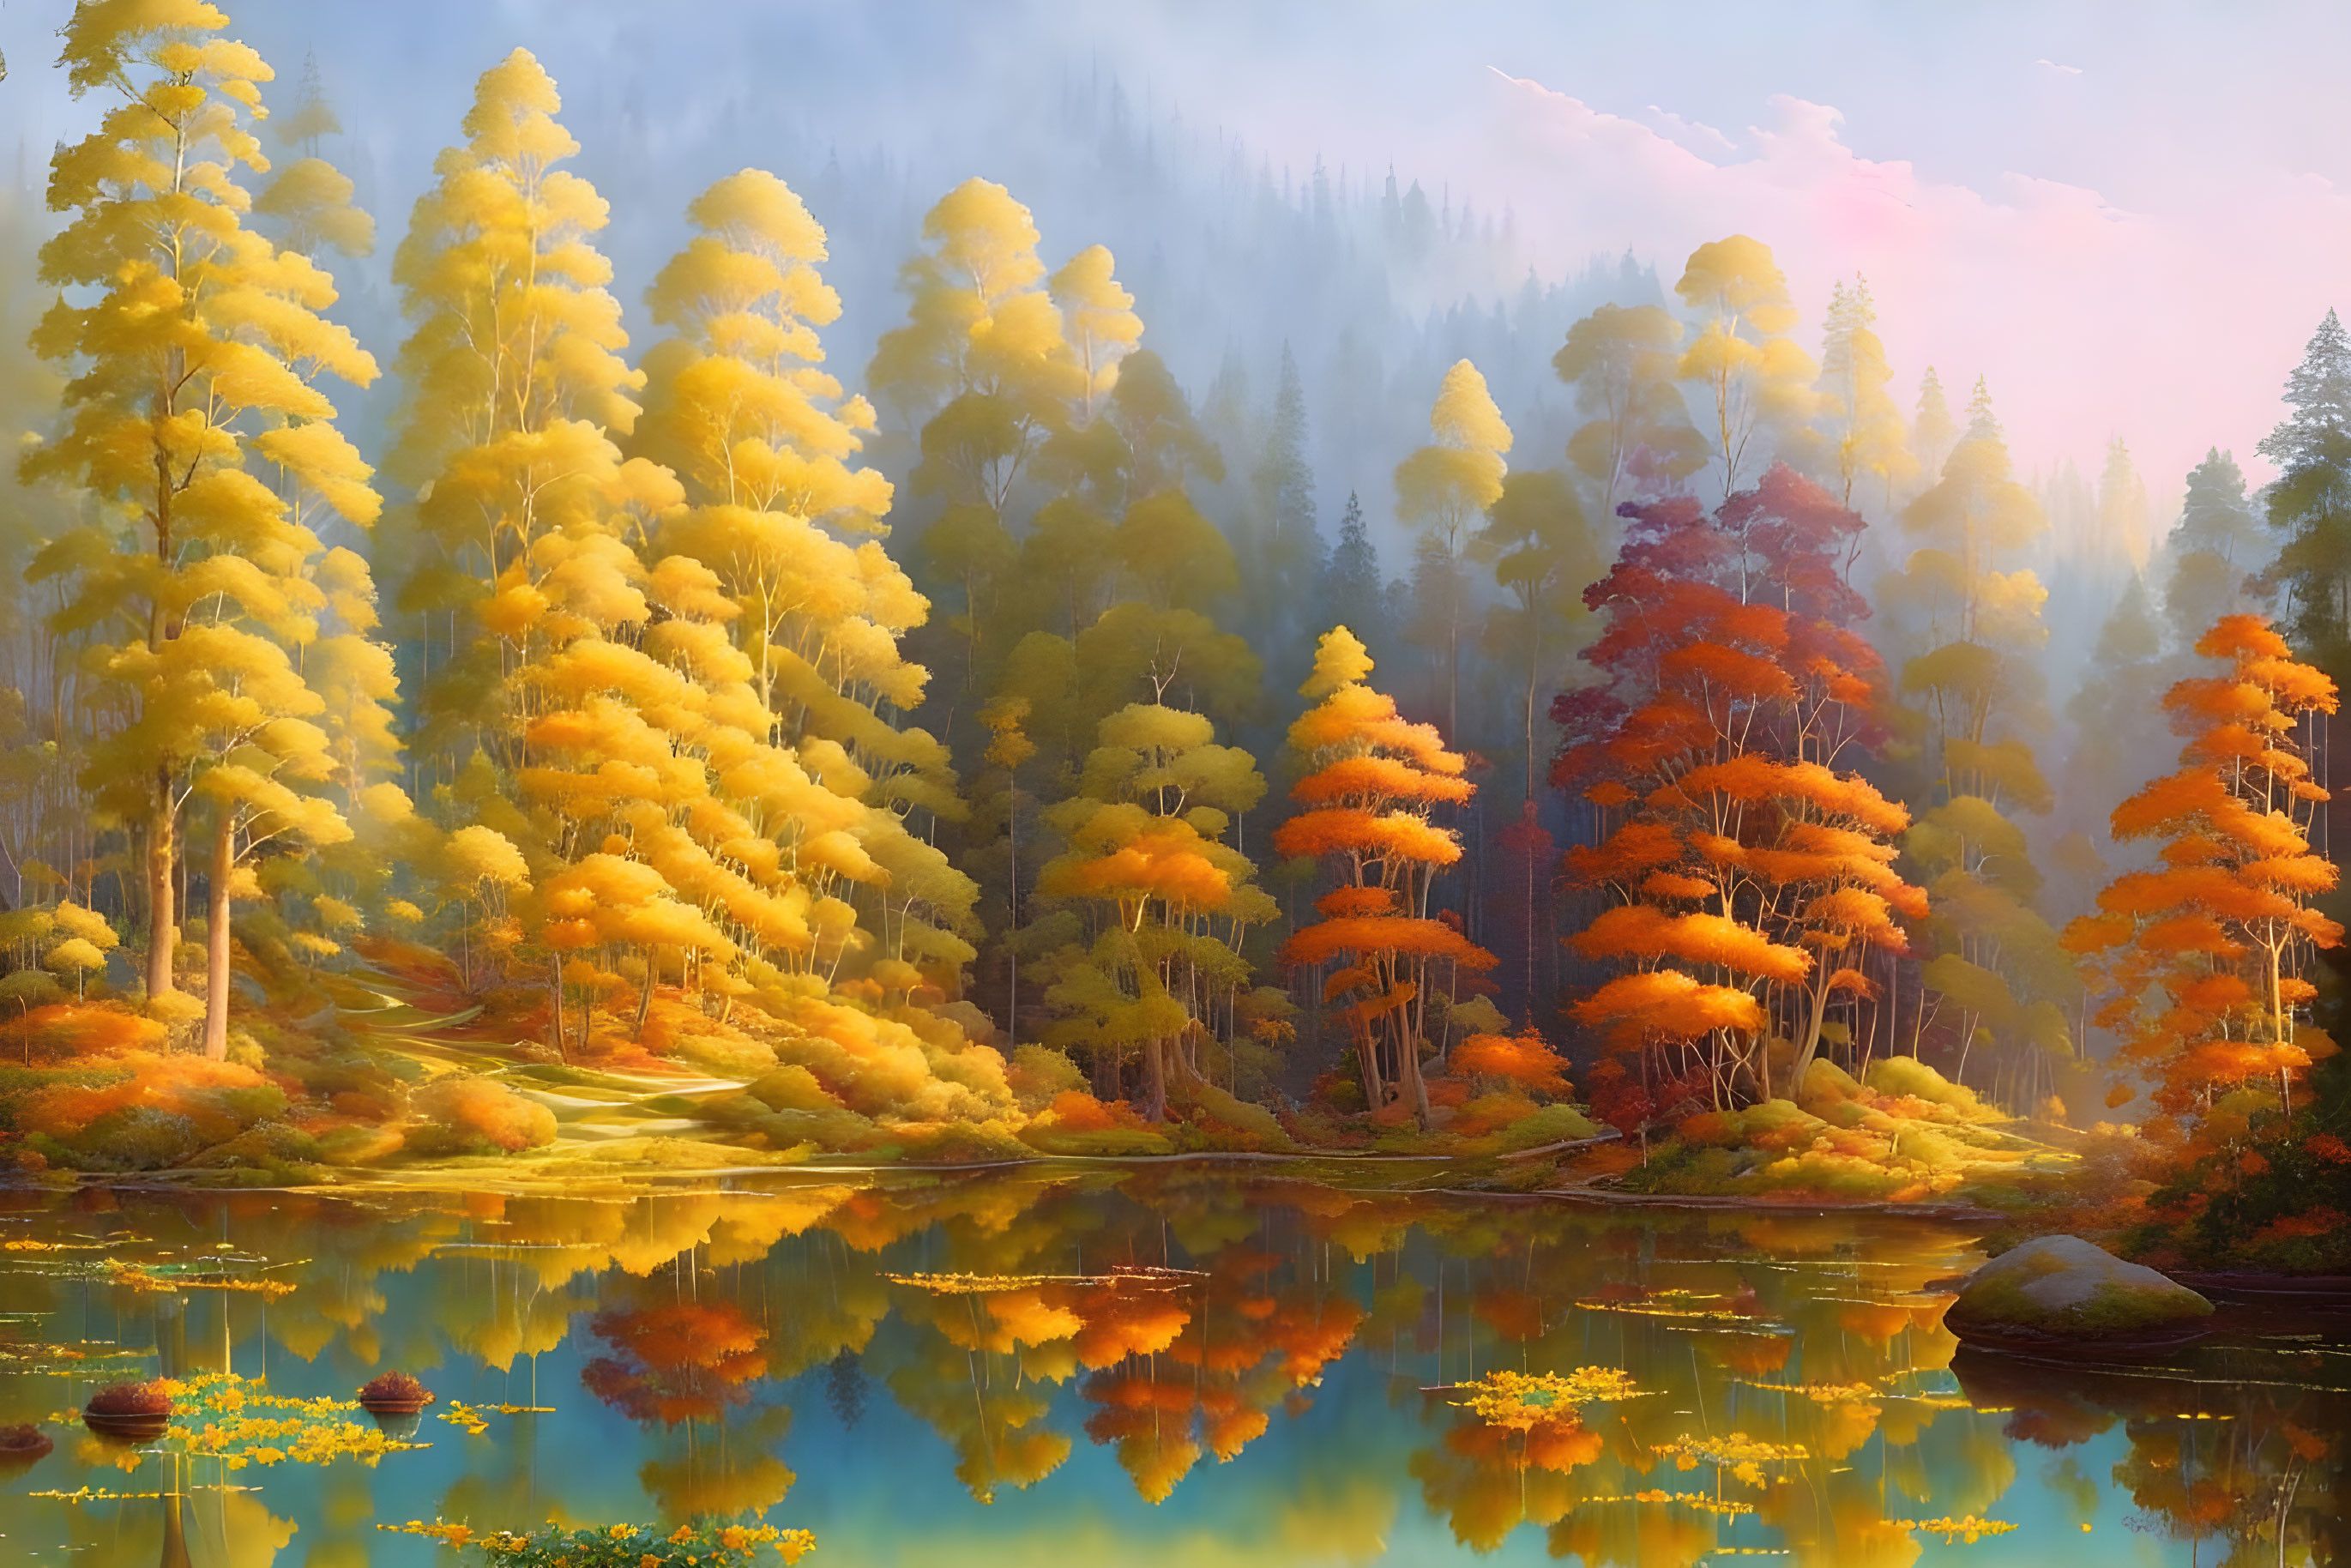 Tranquil autumn forest scene with reflective lake and water lilies